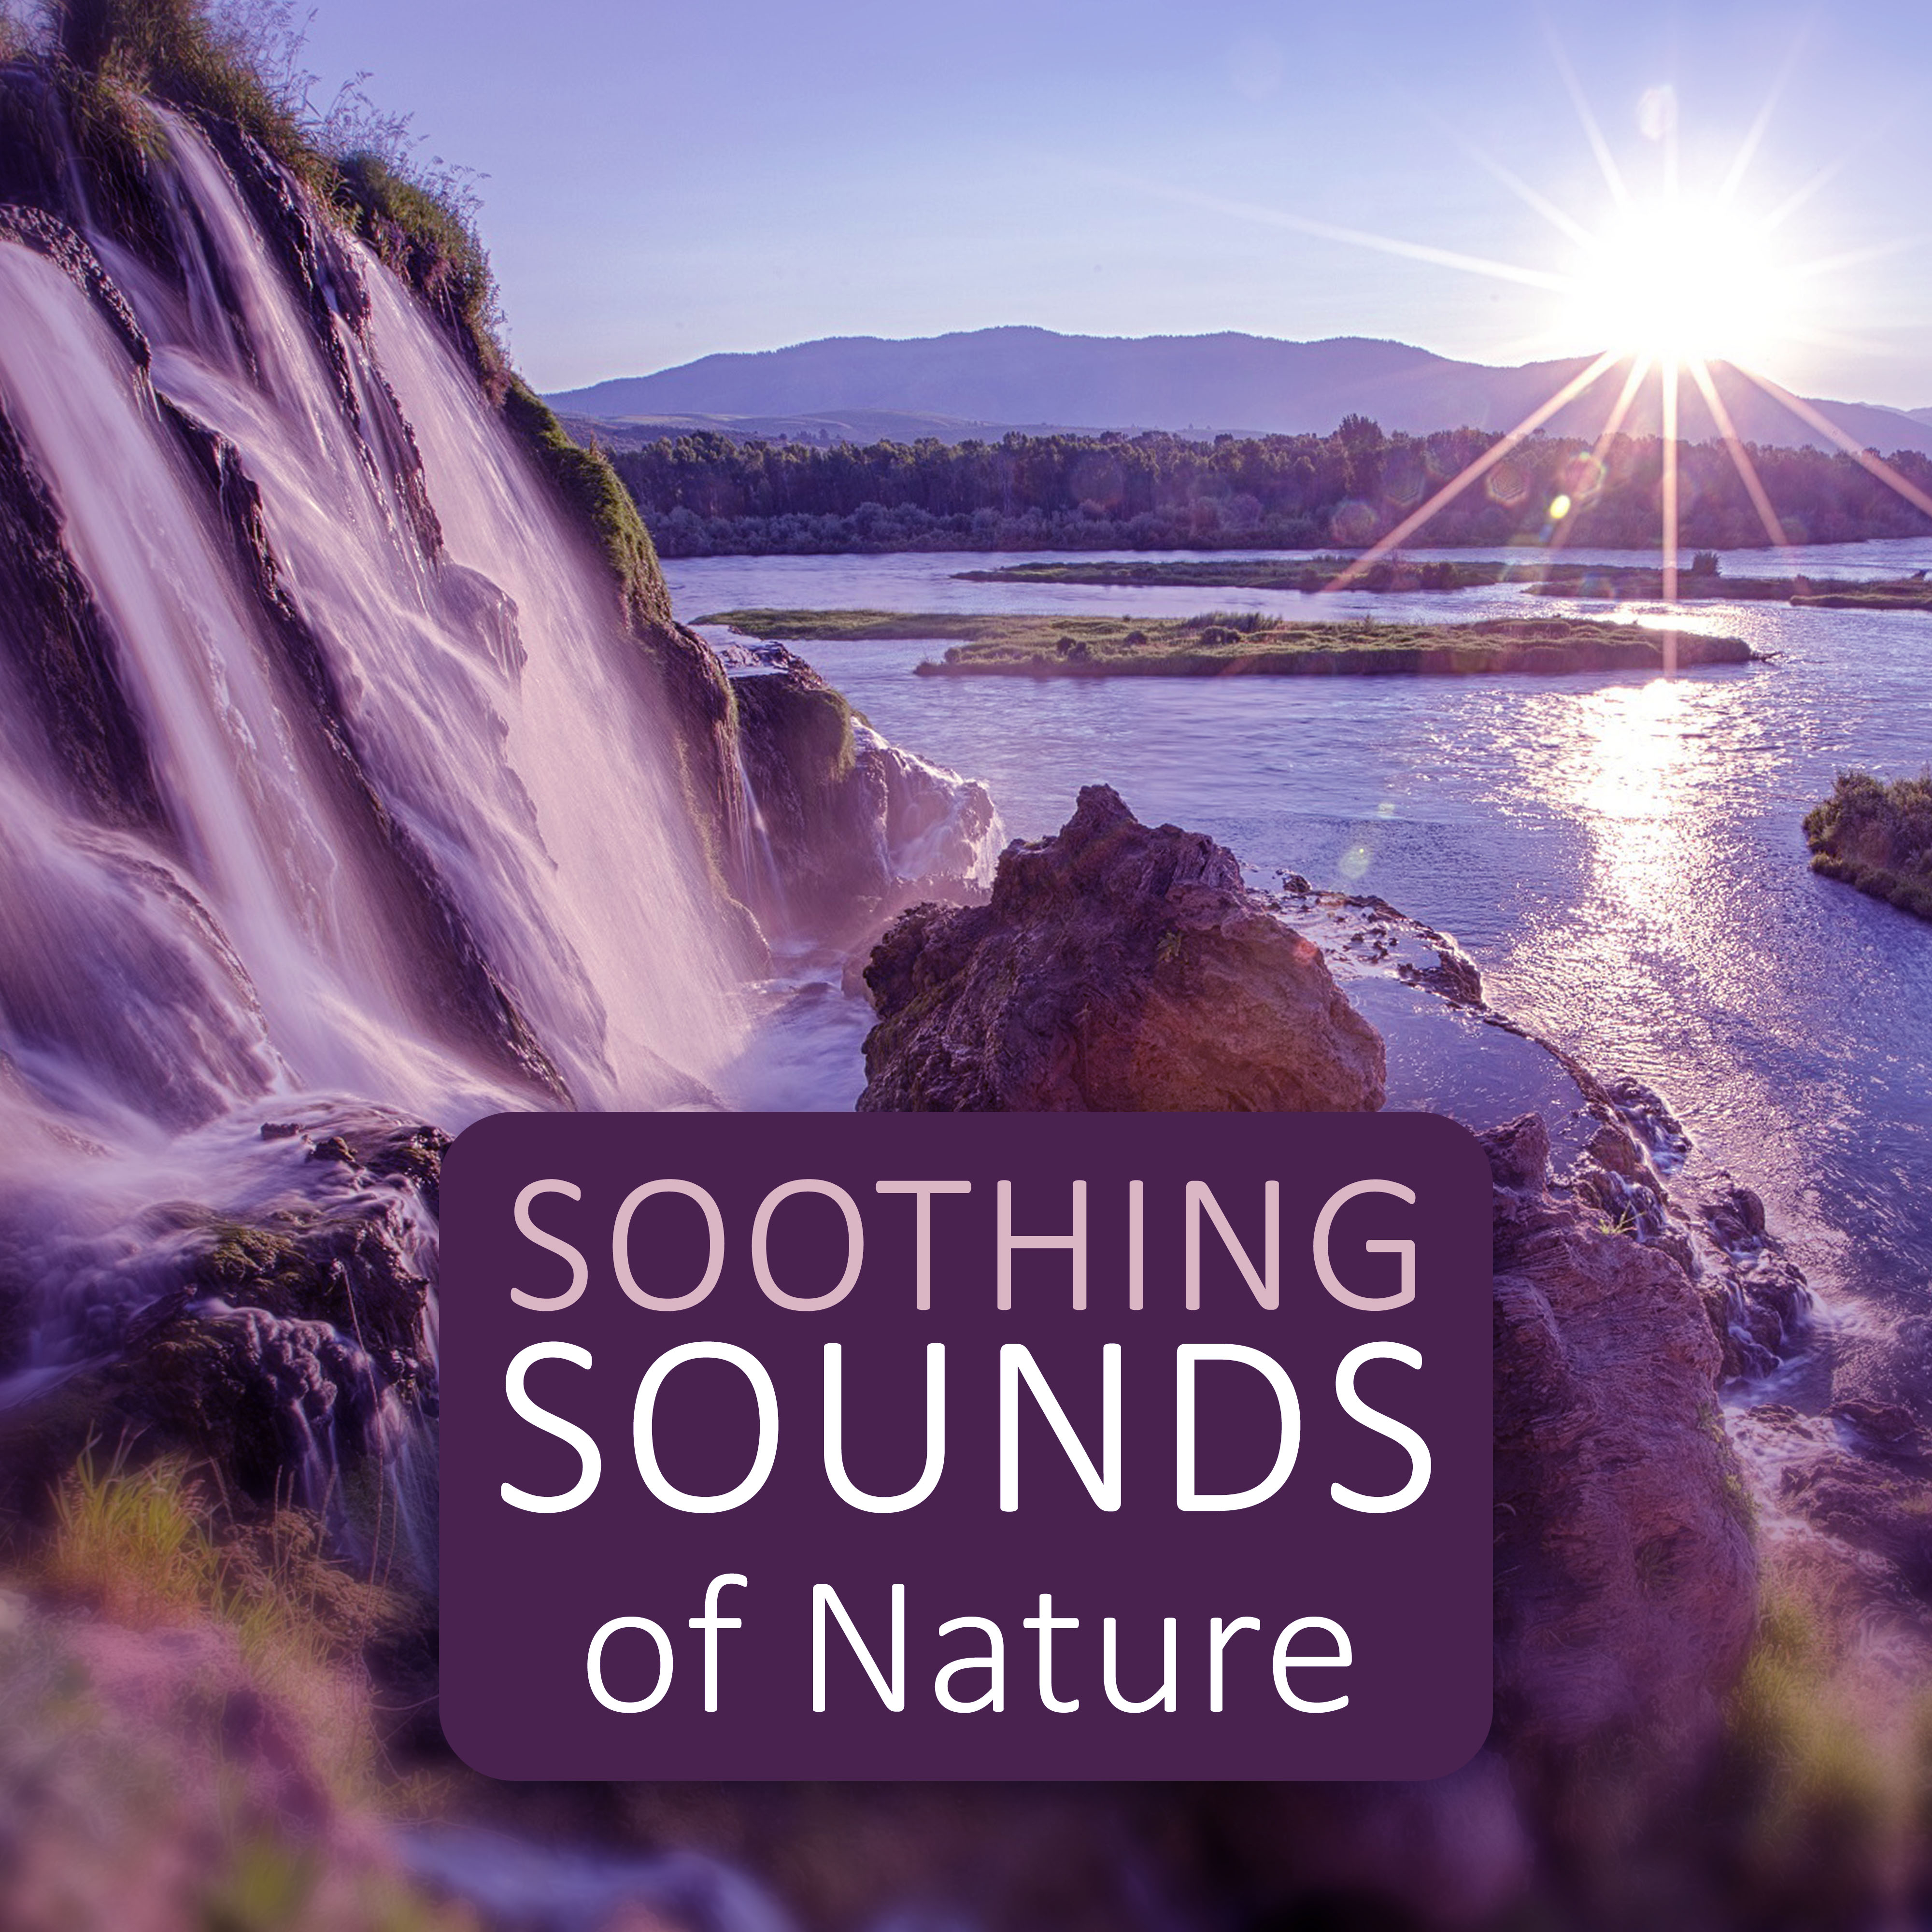 Soothing Sounds of Nature  Sound of Nature, Summer Sounds, Calming Music for Relaxation, Deep Sounds for Meditation